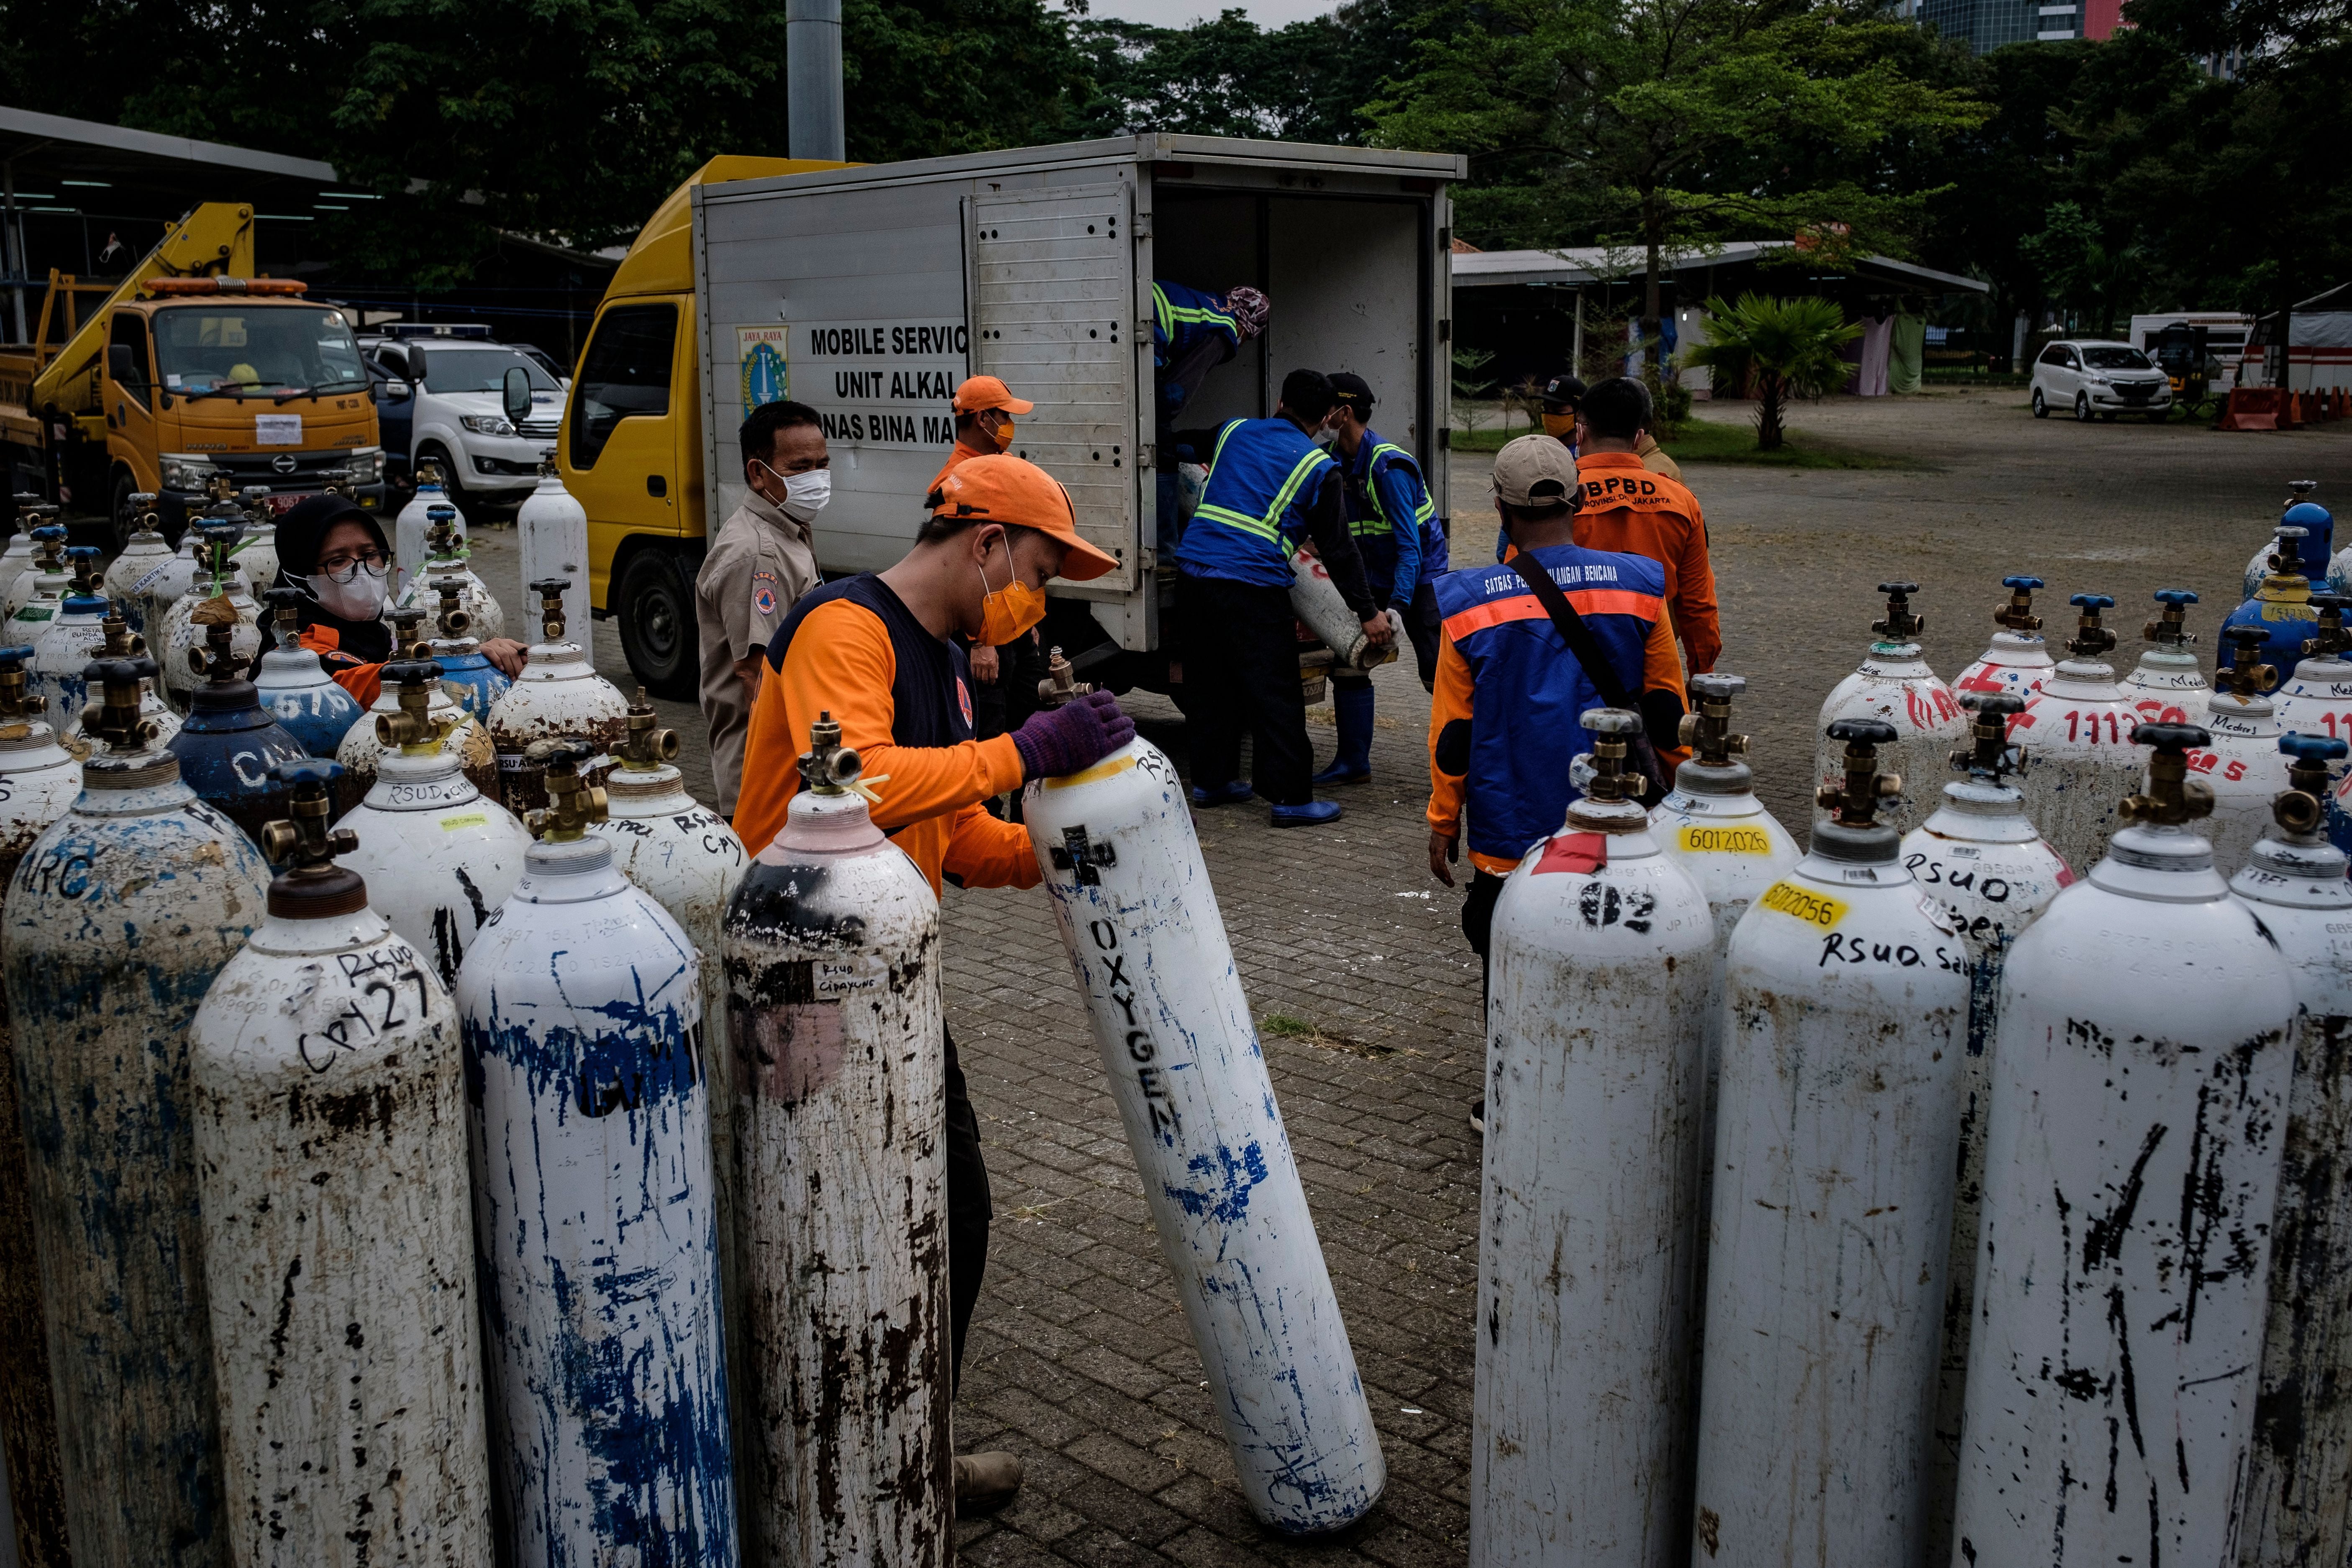 Members of Indonesia’s national rescue organisation offload oxygen tanks to be distributed to hospitals in Jakarta on 13 July 2021